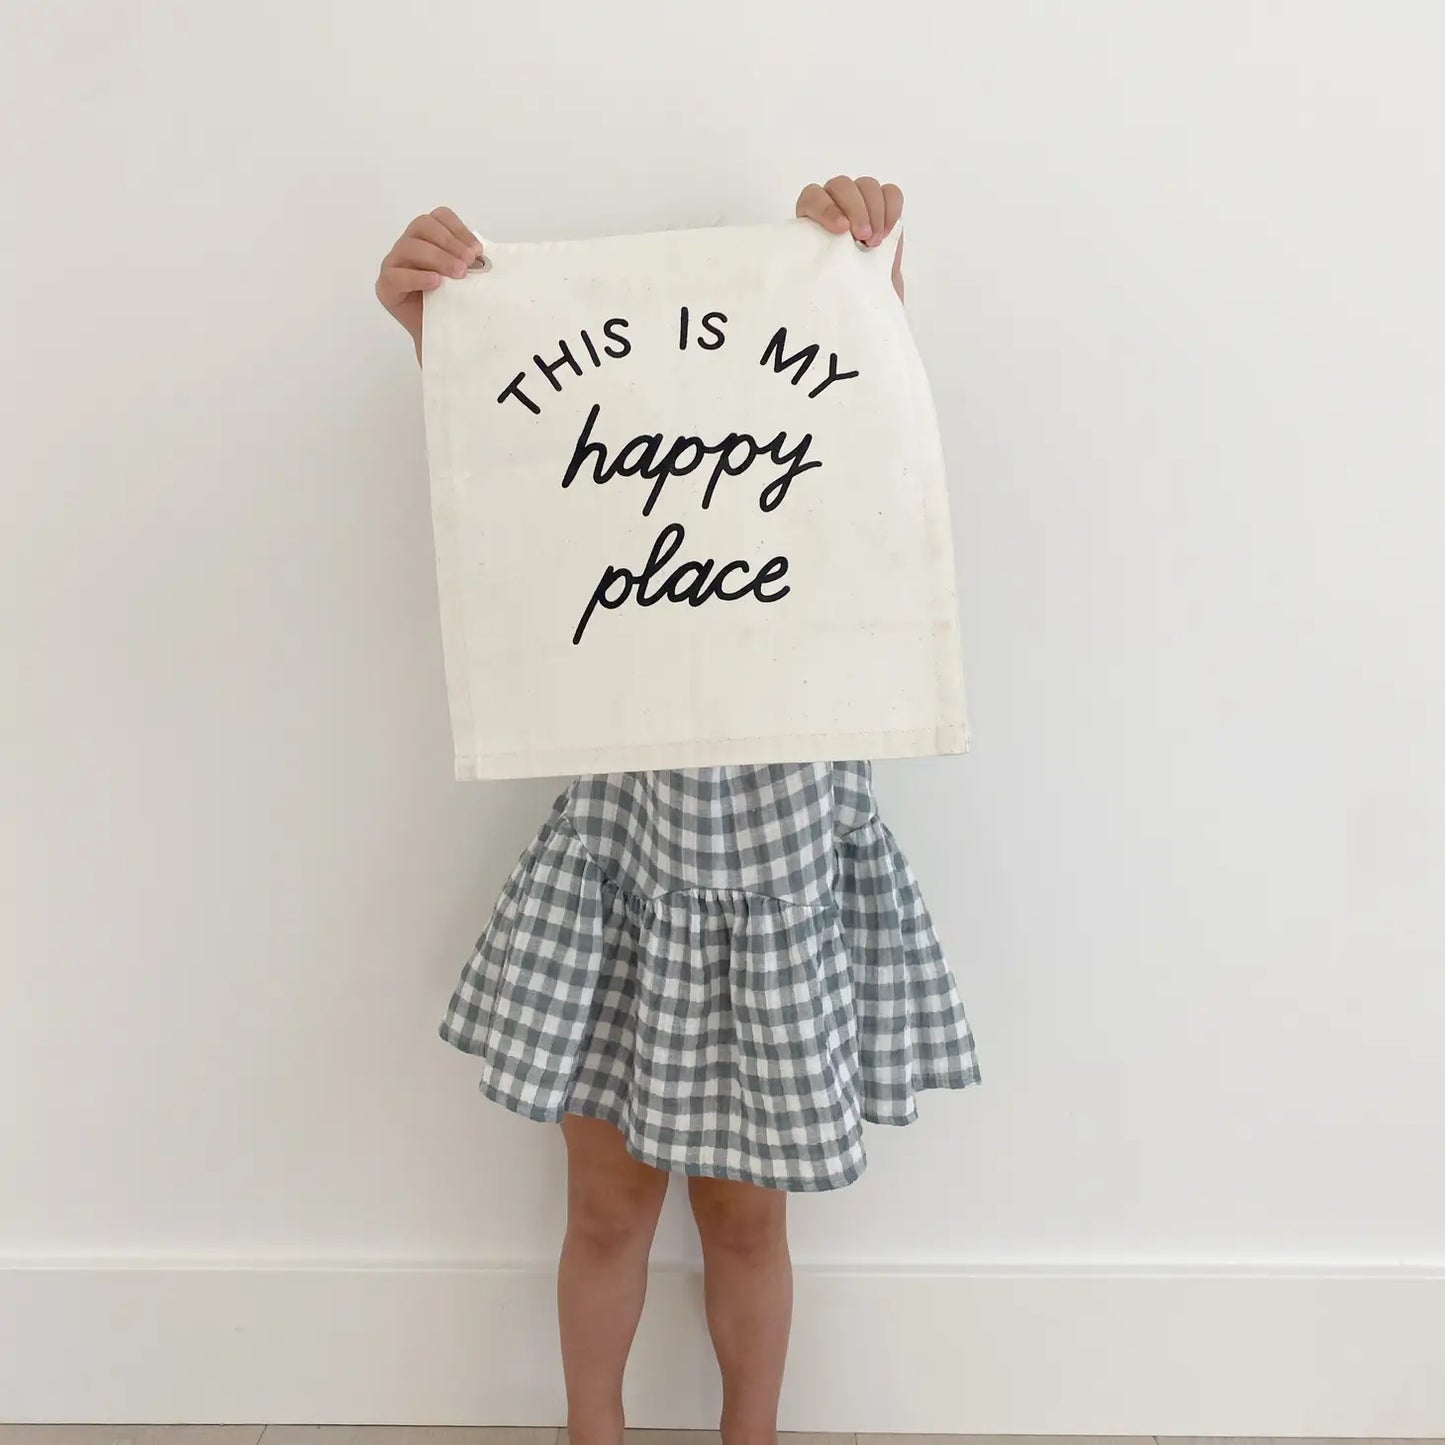 Banner: This is My Happy Place